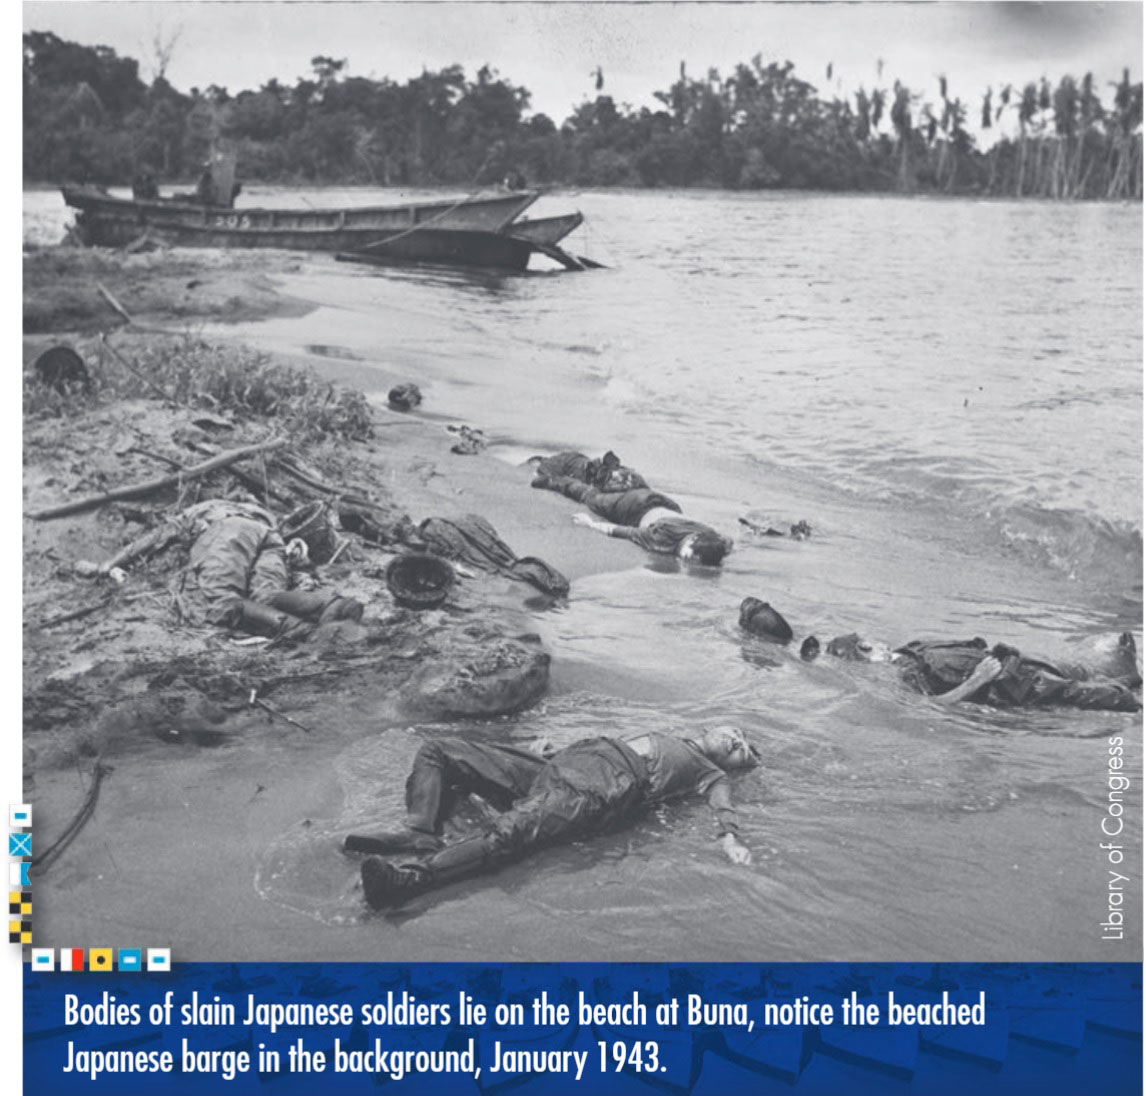 Bodies of slain Japenese soldiers lie on the beach at Buna, notice the beached Japanese barge in the background, January 1943. Photo from the Library of Congress.